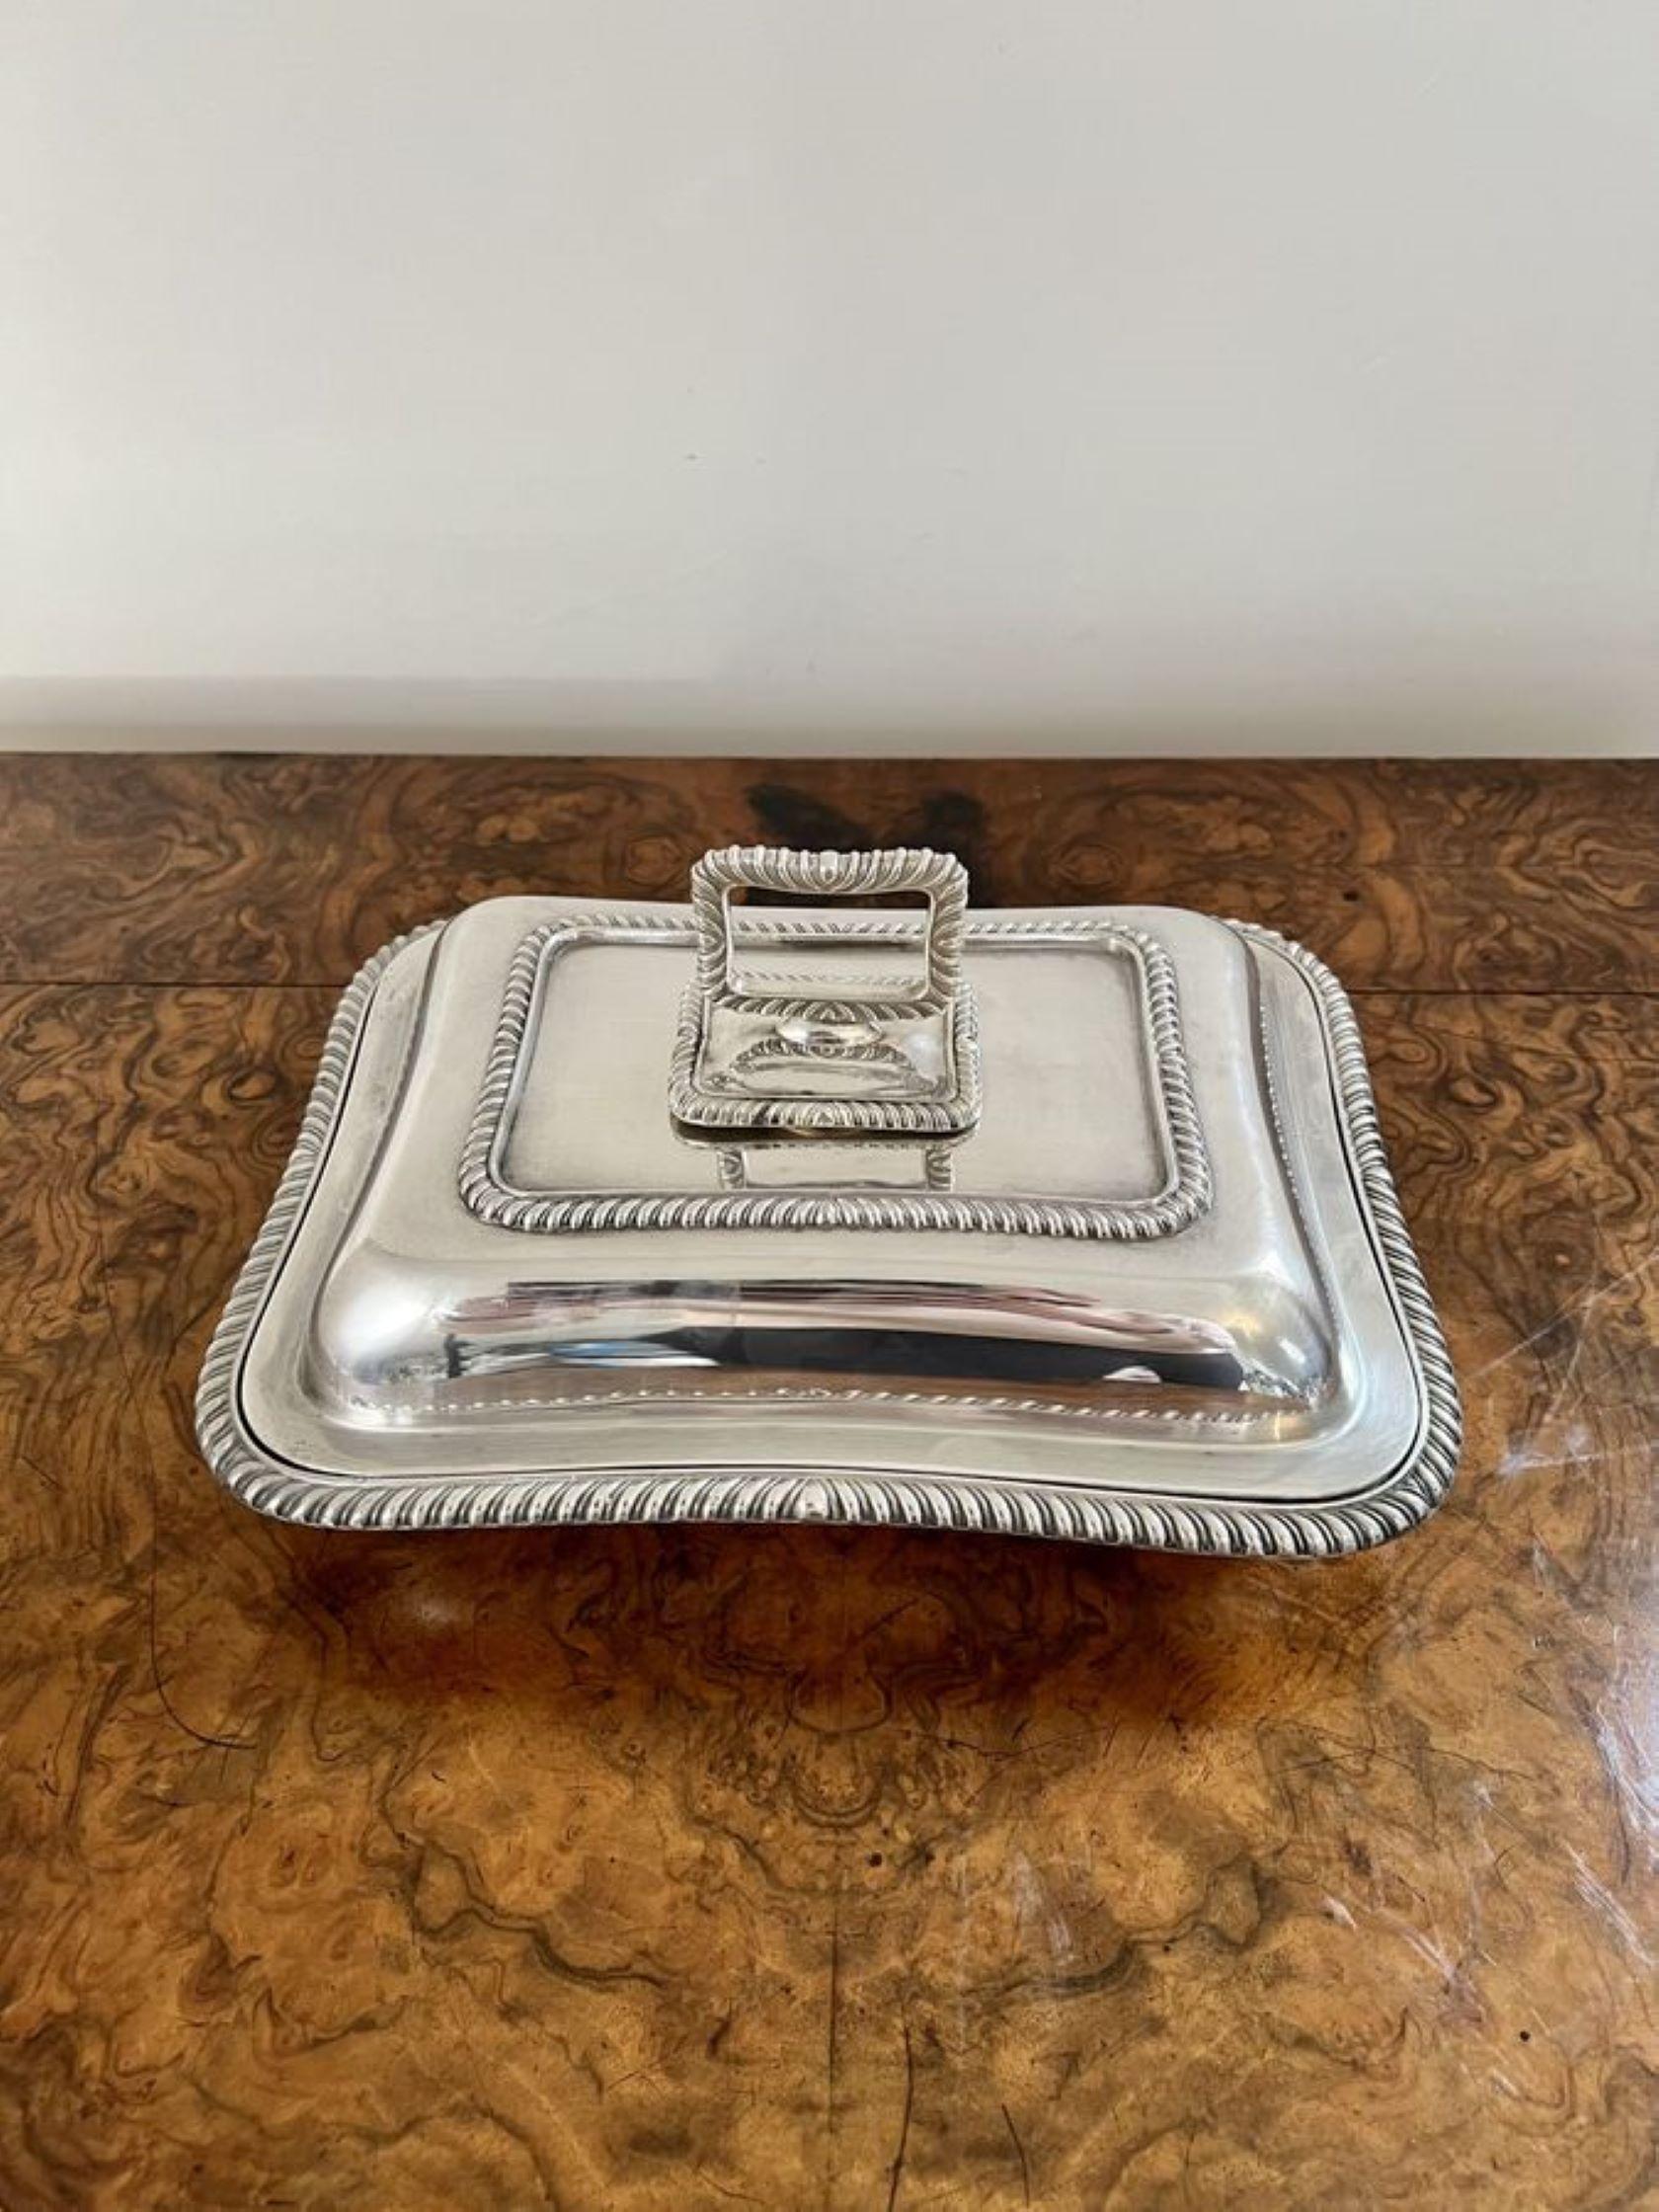 Stunning antique Edwardian quality silver plated rectangle entrée dish having a quality rectangle silver plated entrée dish with ornate detail round the rim, a lift off lid with a silver plated ornate handle to the top.

D. 1900